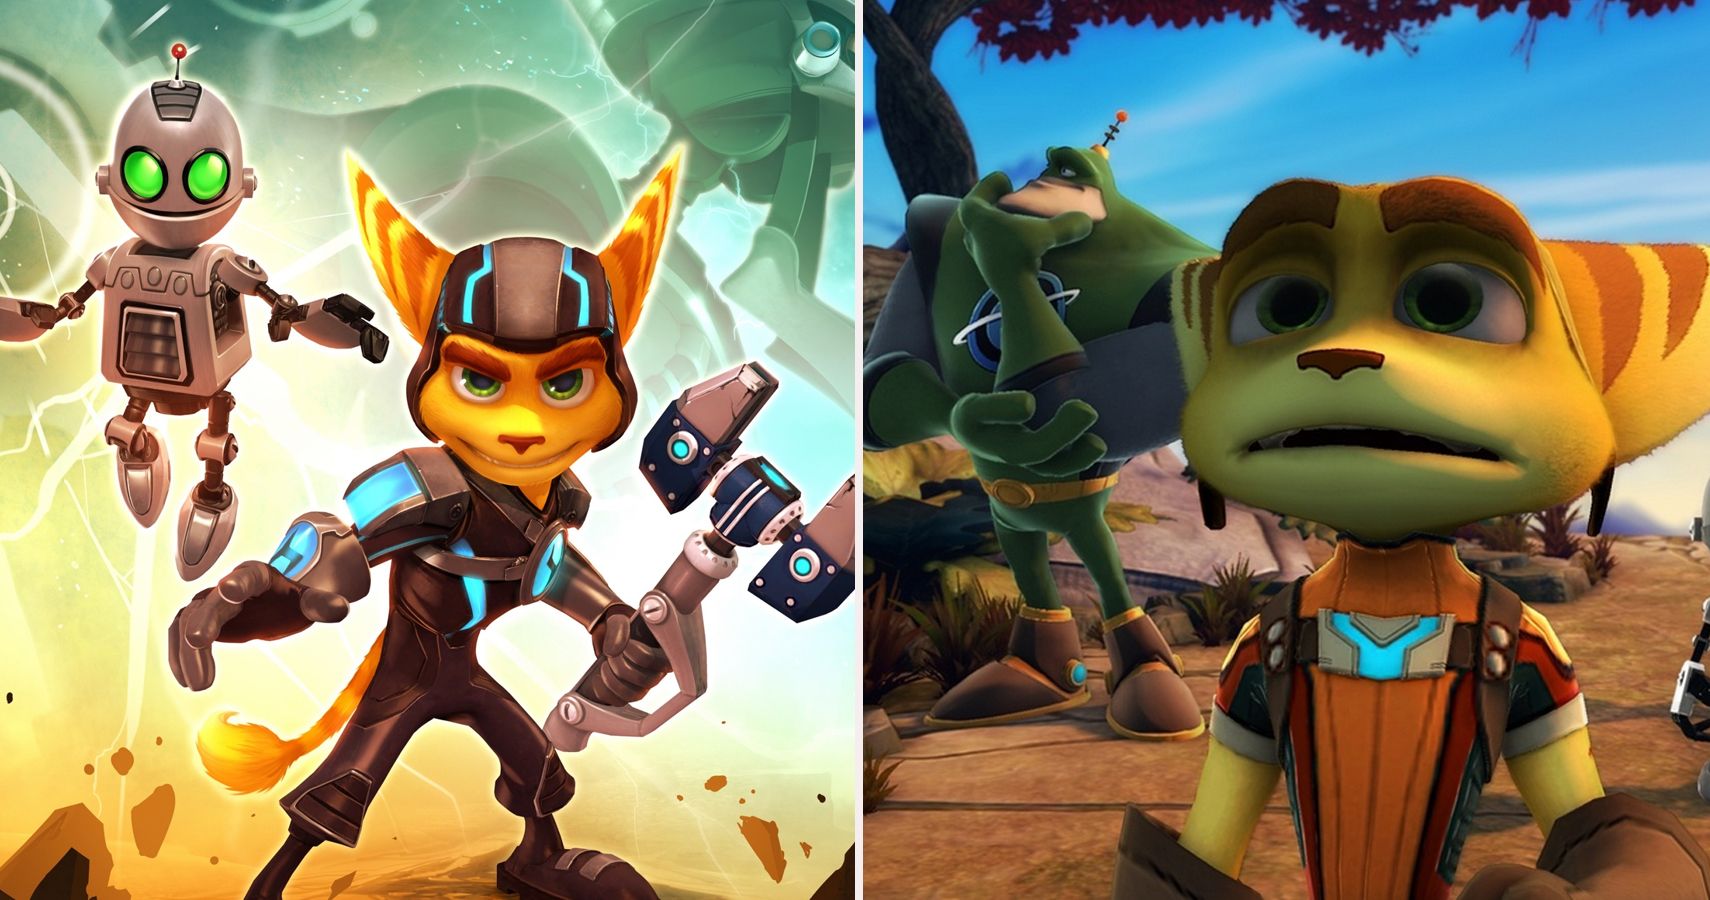 how many ratchet and clank games are there